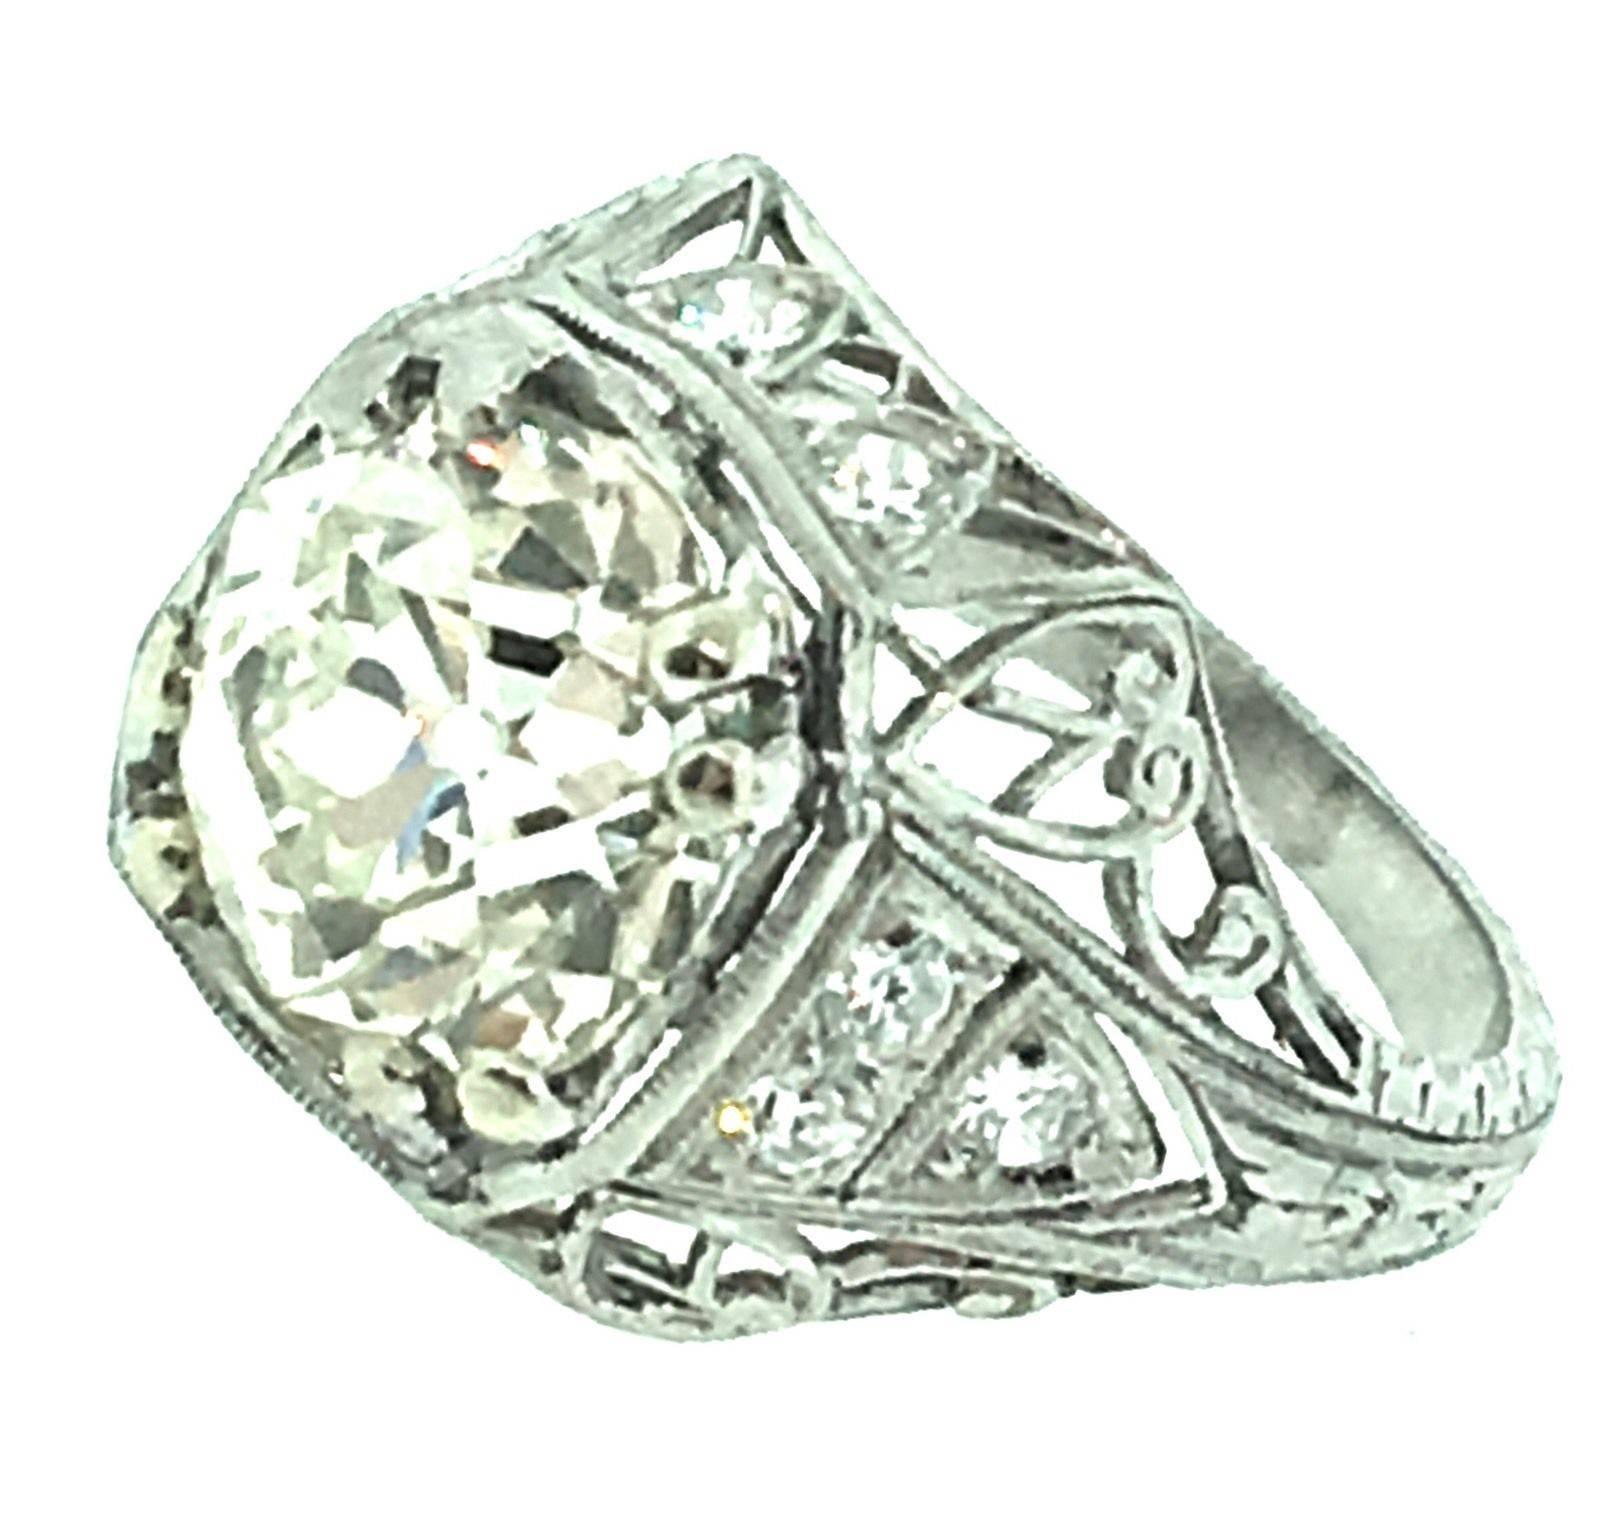 All original antique diamond ring with old world craftsmanship, fine openwork, filigree and milgrain details. GIA Certified 2.92 ct Old European Brilliant cut center, VS1 in Clarity, M in color (faces up white, looks like J-K color)
[ Stone